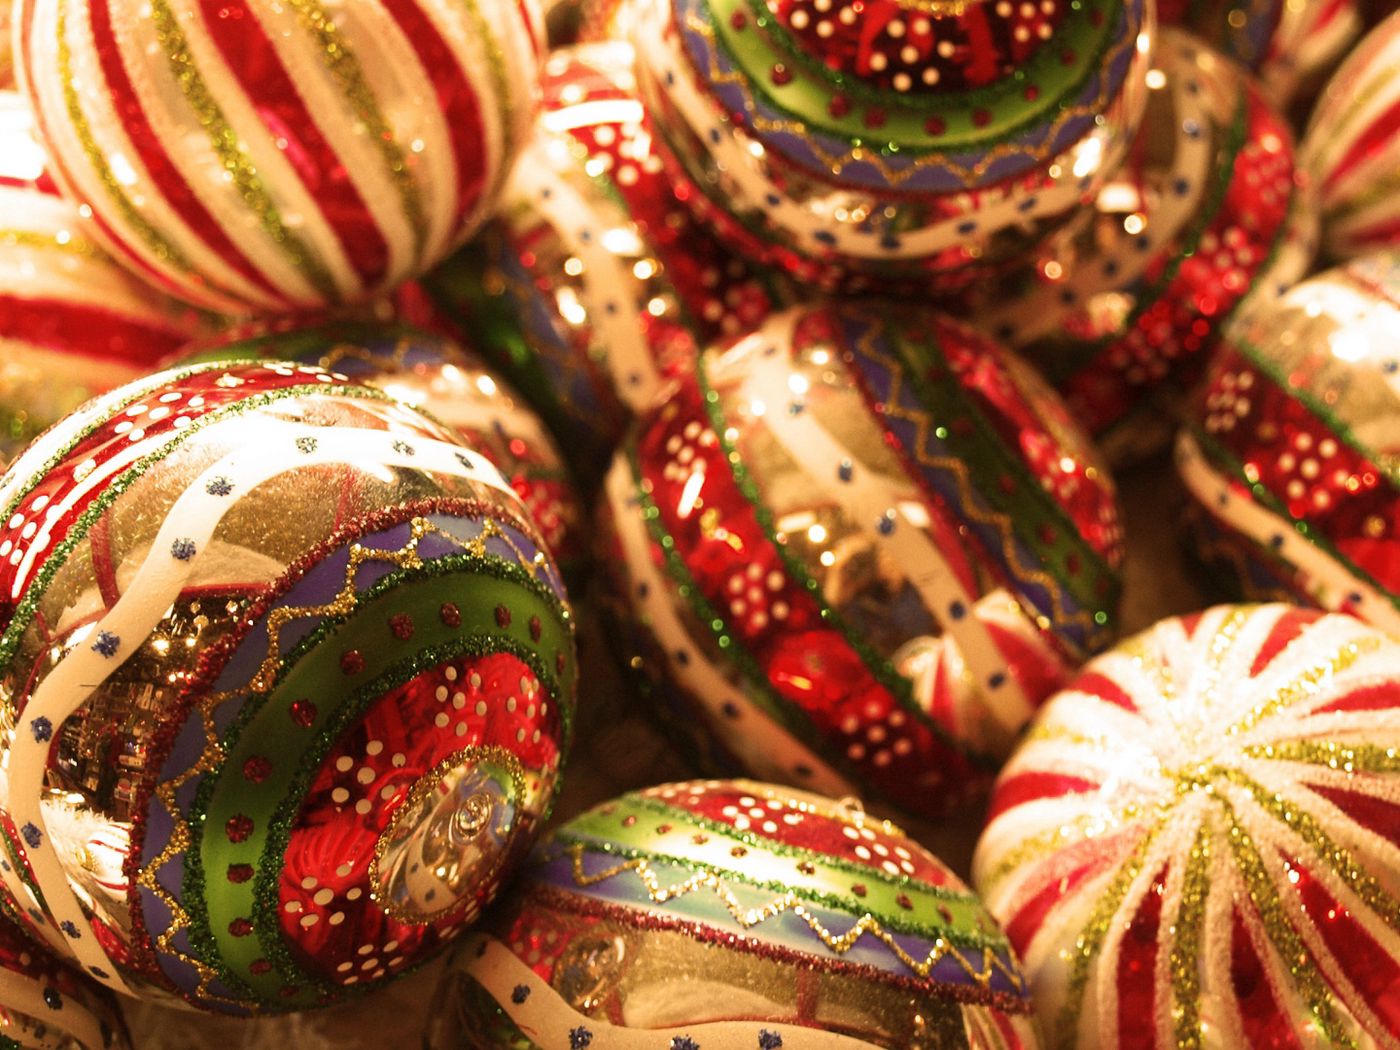 Download wallpaper 1400x1050 christmas ornament, new year, christmas, balls, toys standard 4:3 HD background